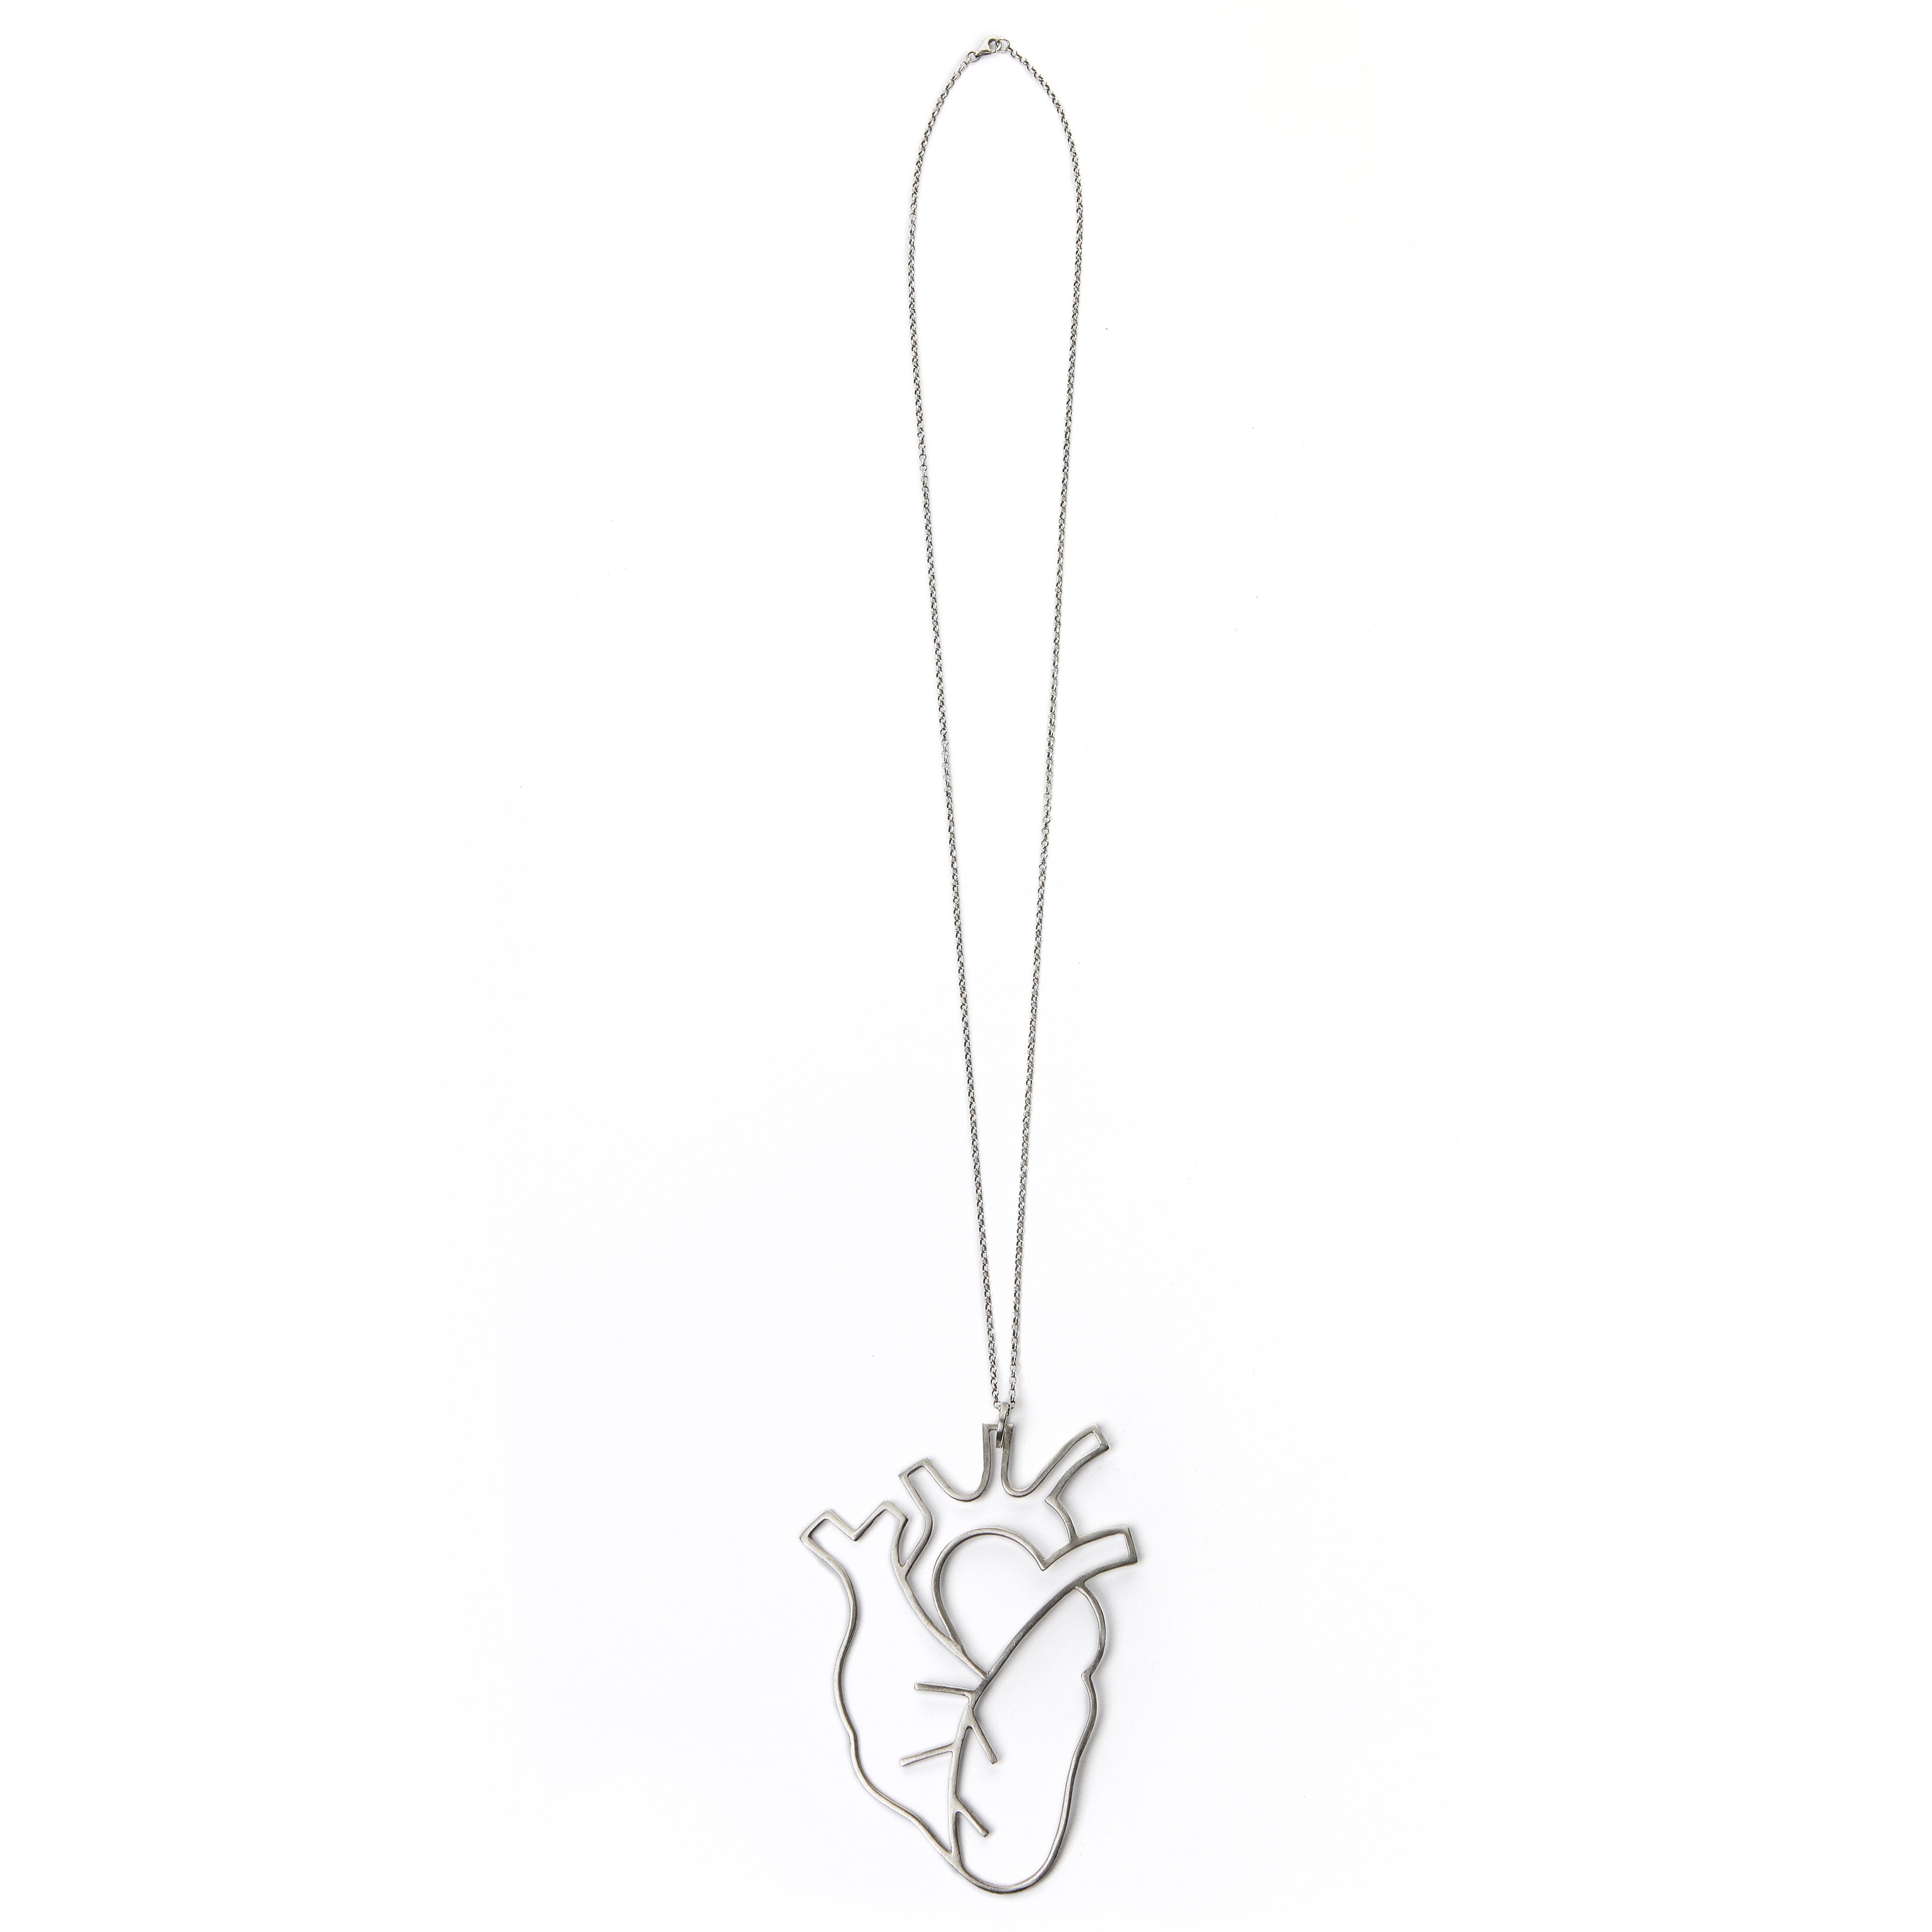 Human heart chain necklace